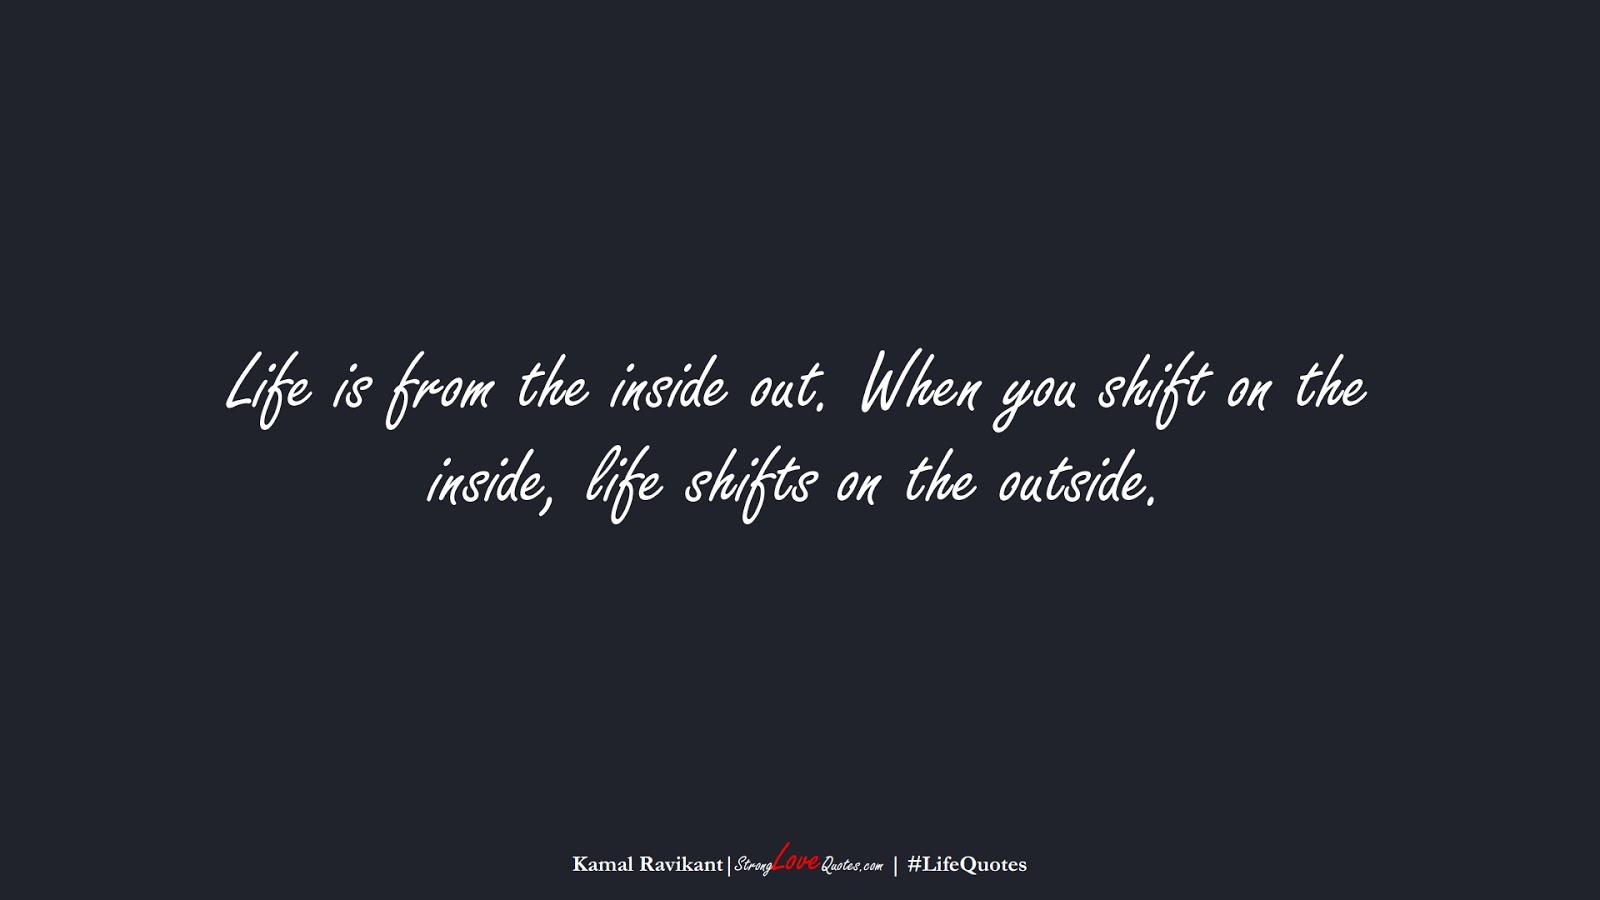 Life is from the inside out. When you shift on the inside, life shifts on the outside. (Kamal Ravikant);  #LifeQuotes